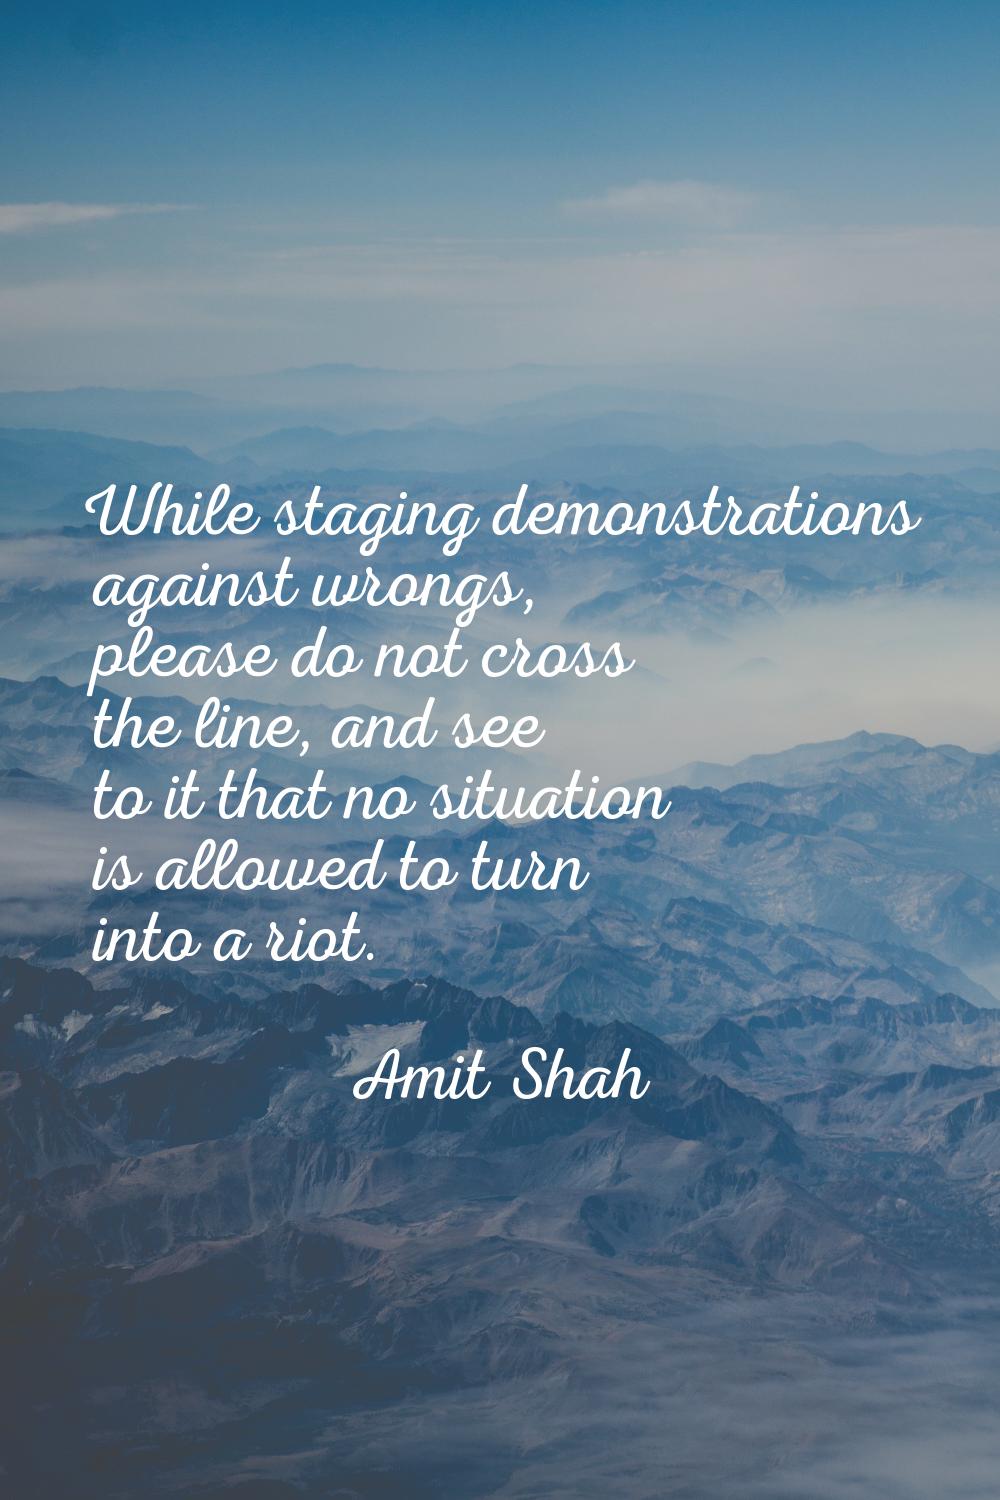 While staging demonstrations against wrongs, please do not cross the line, and see to it that no si